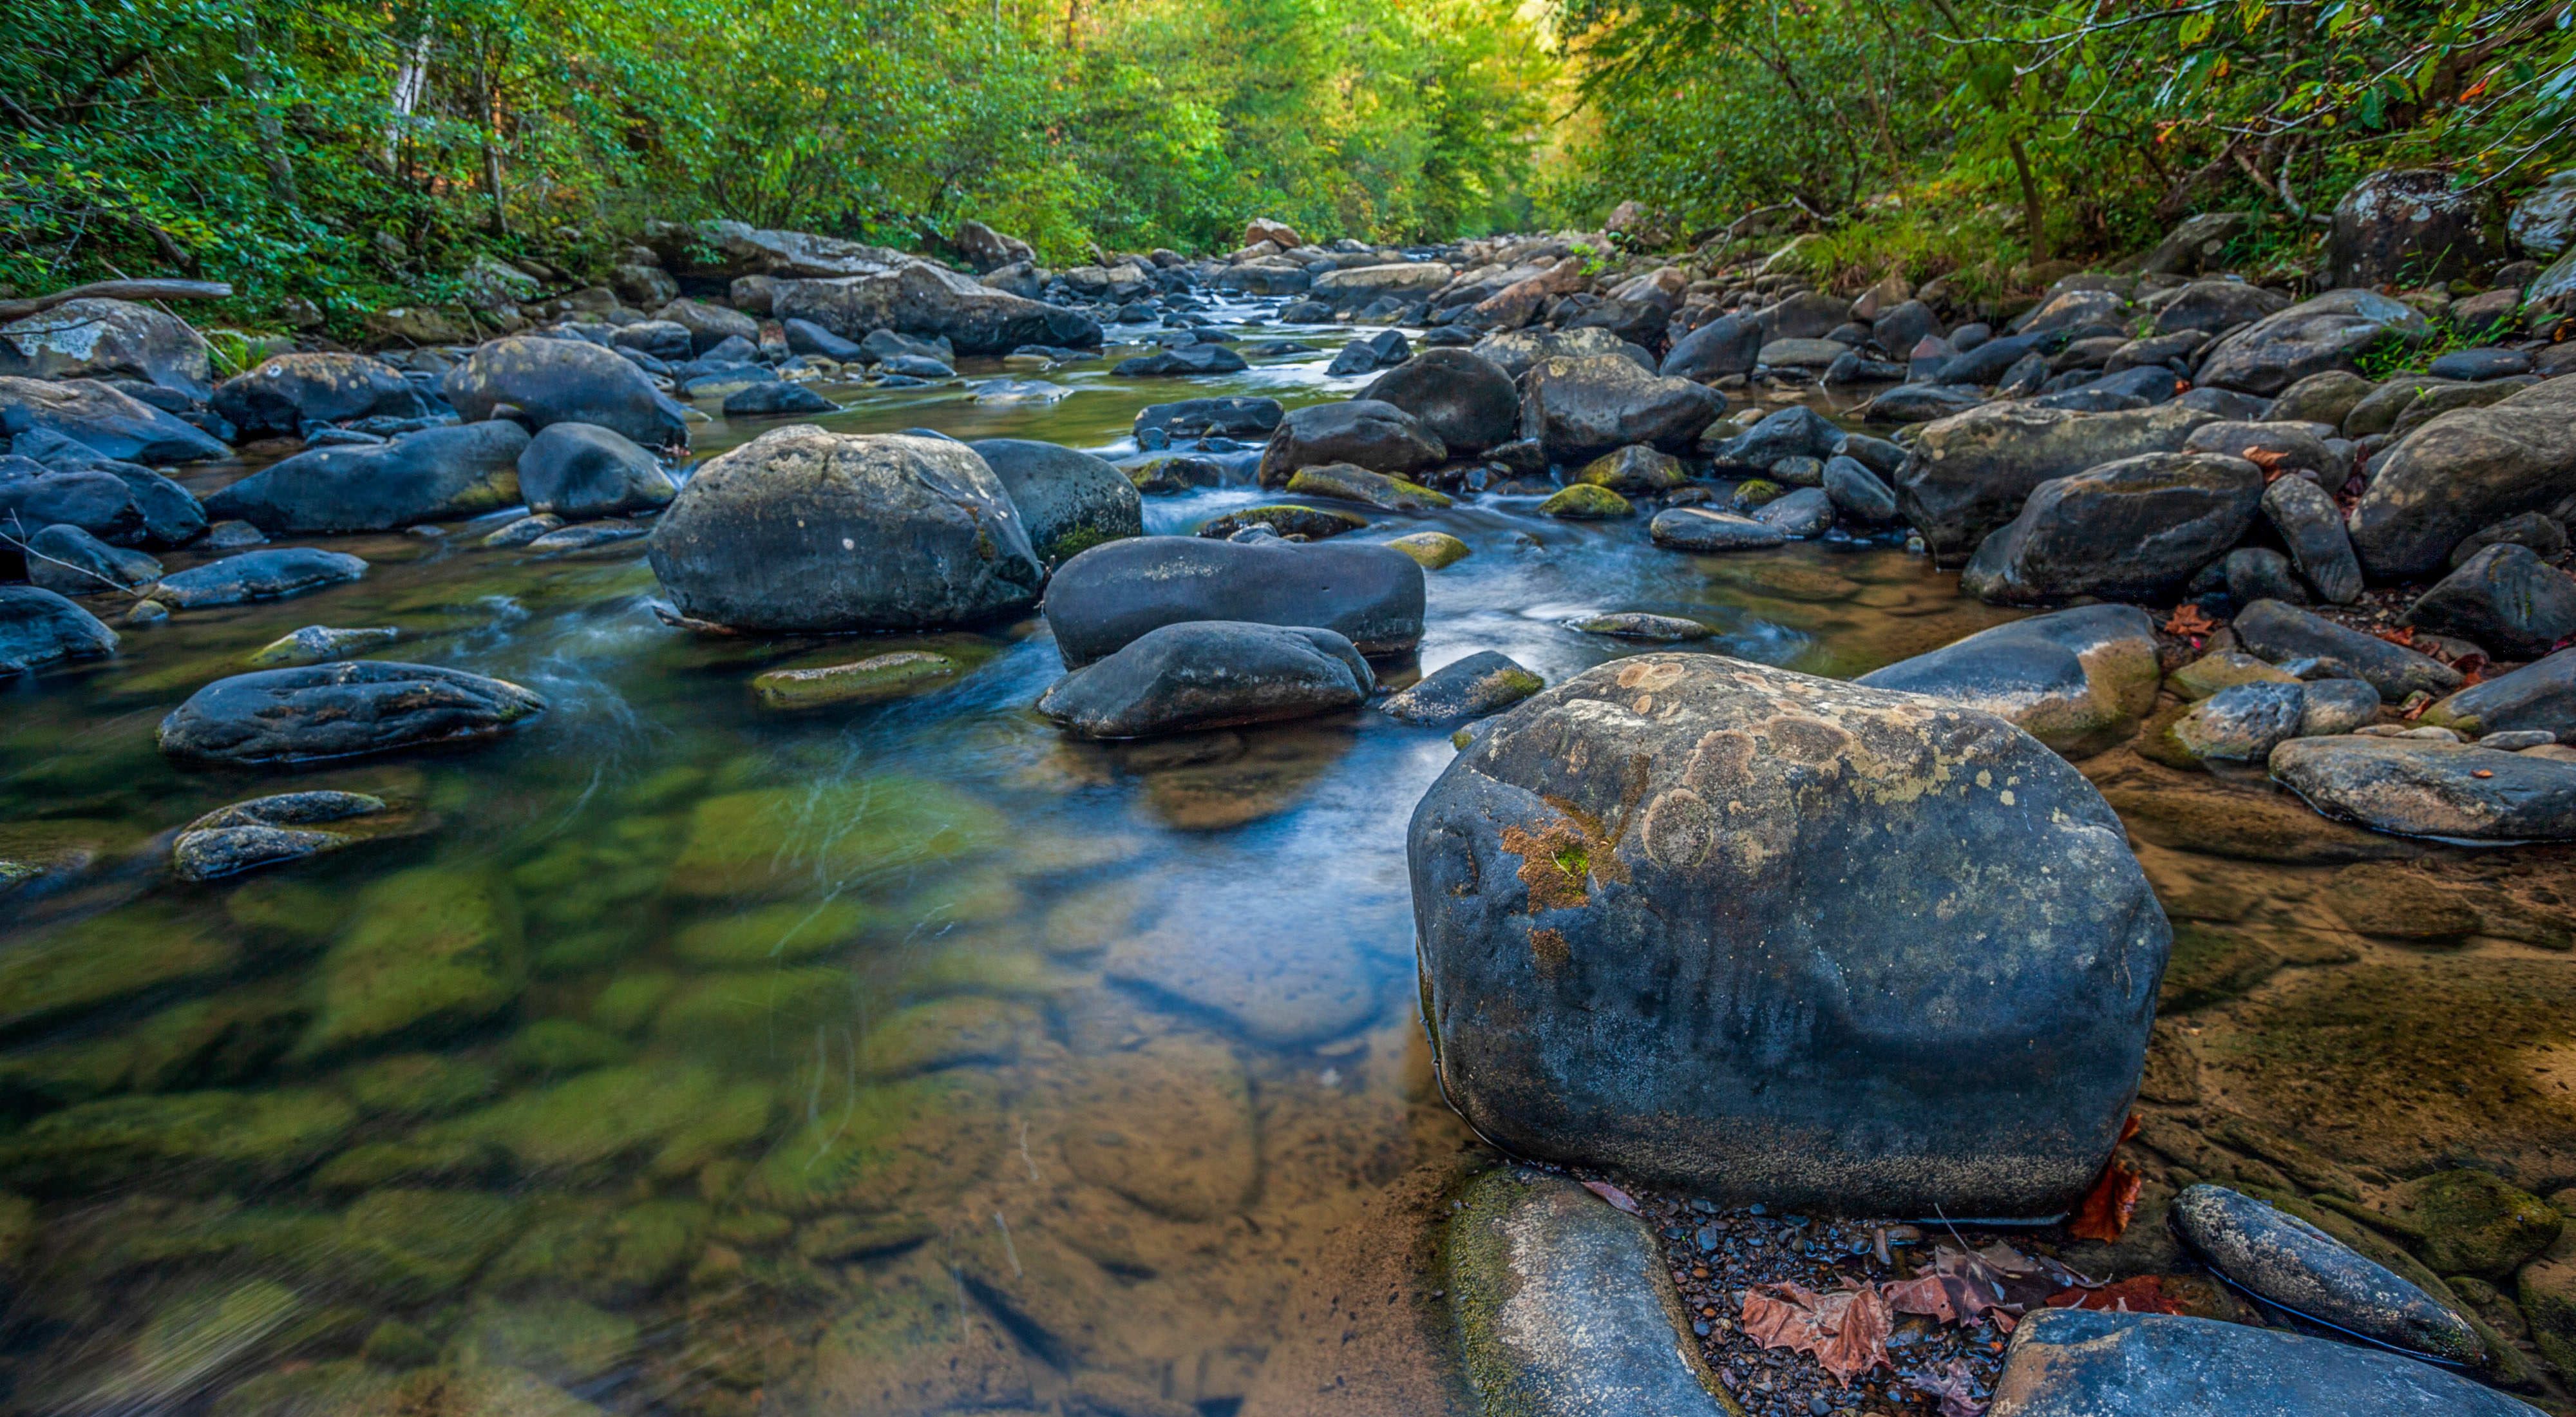 A close view of water flowing through rocks in Tackett Creek, a stream in the Cumberland Forest Project in Tennessee.